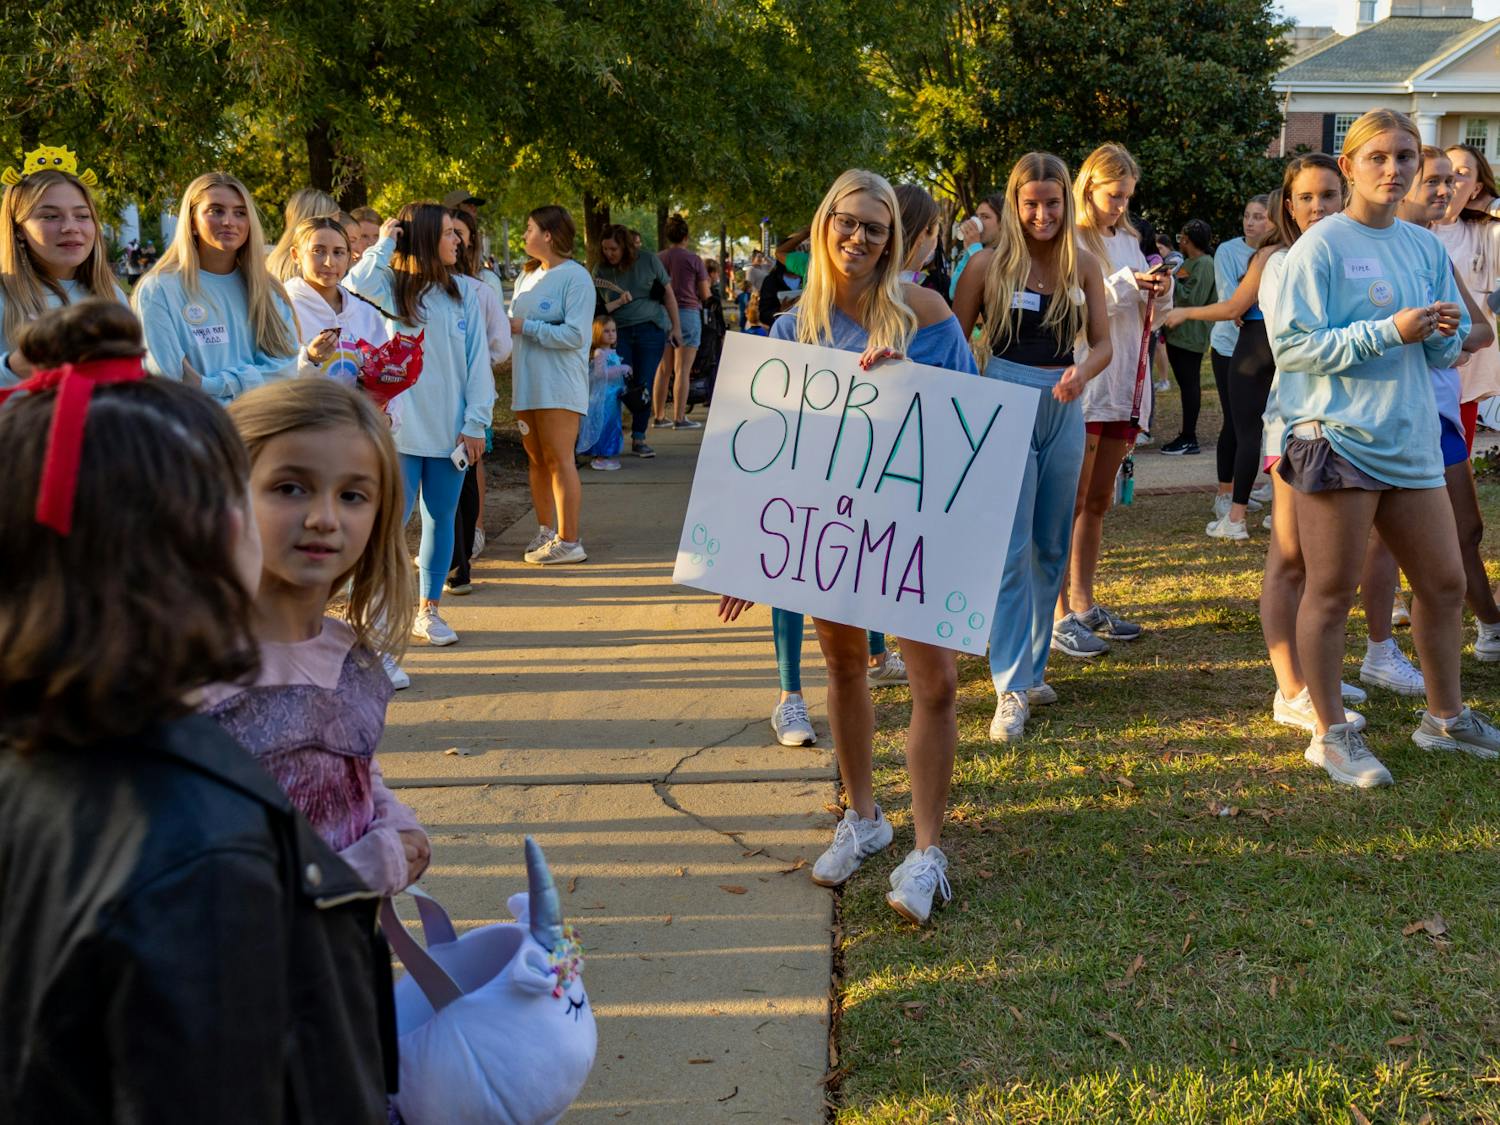 A Trick or Treat with the Greeks attendee member holds a sign reading "Spray Sigma" towards community members on Oct. 25, 2022. Trick or treaters and community members participated in spraying water at a small group of fraternity brothers dressed as mermaids as a way of entertaining attendees outside of the fraternity house.